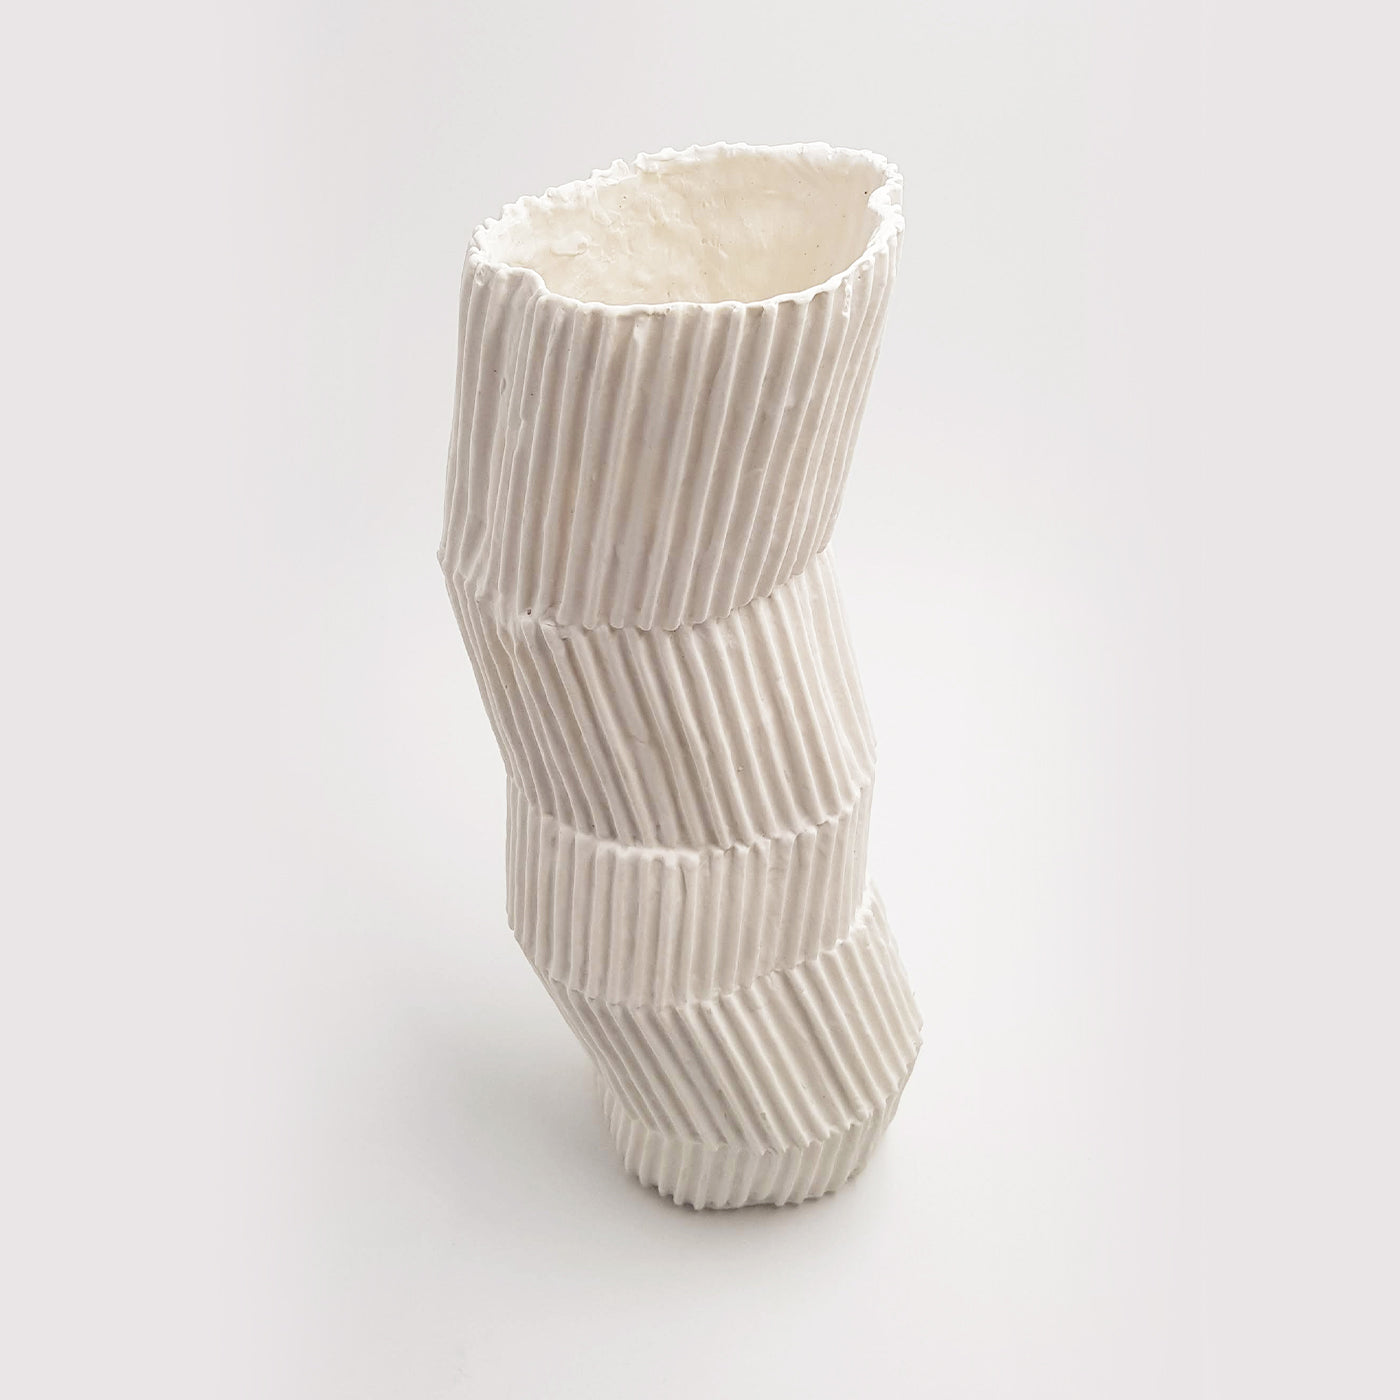 Le Torrette White Paperclay Vase by Nino Basso #2 - Alternative view 3